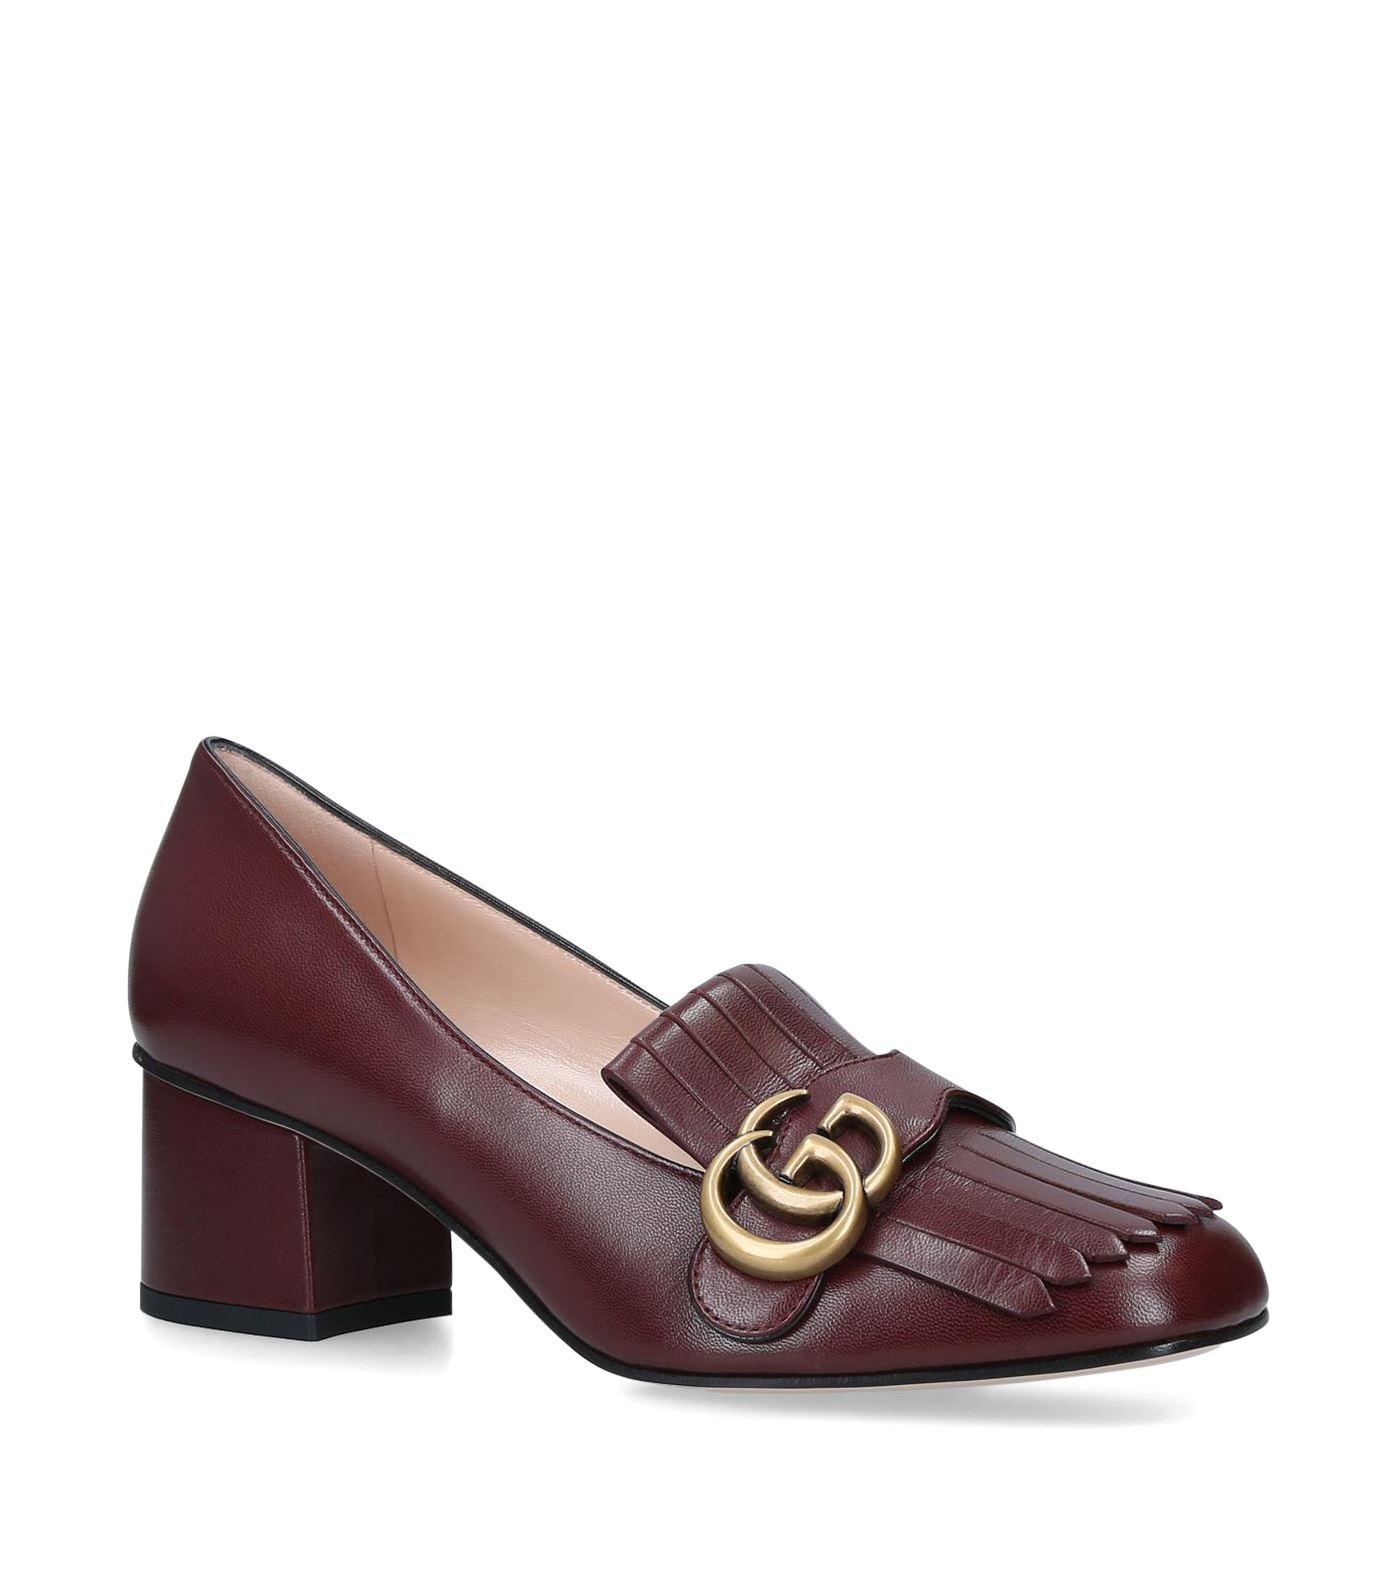 Gucci Leather Marmont Loafers 55 in Burgundy (Purple) - Lyst